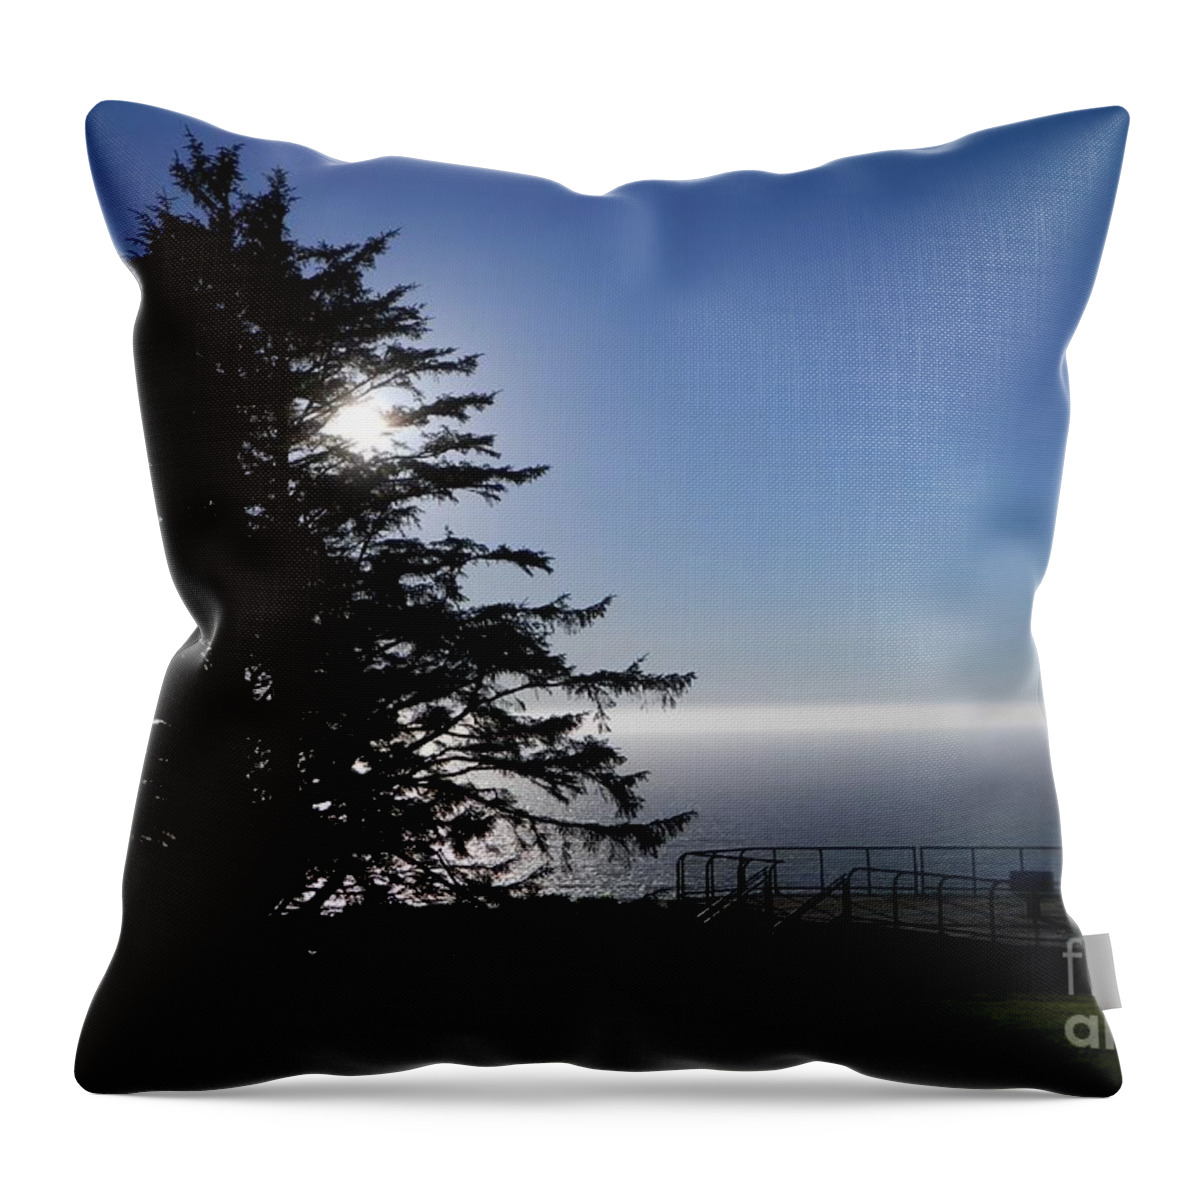 Sunset Throw Pillow featuring the photograph Sun Behind Tree by Gallery Of Hope 